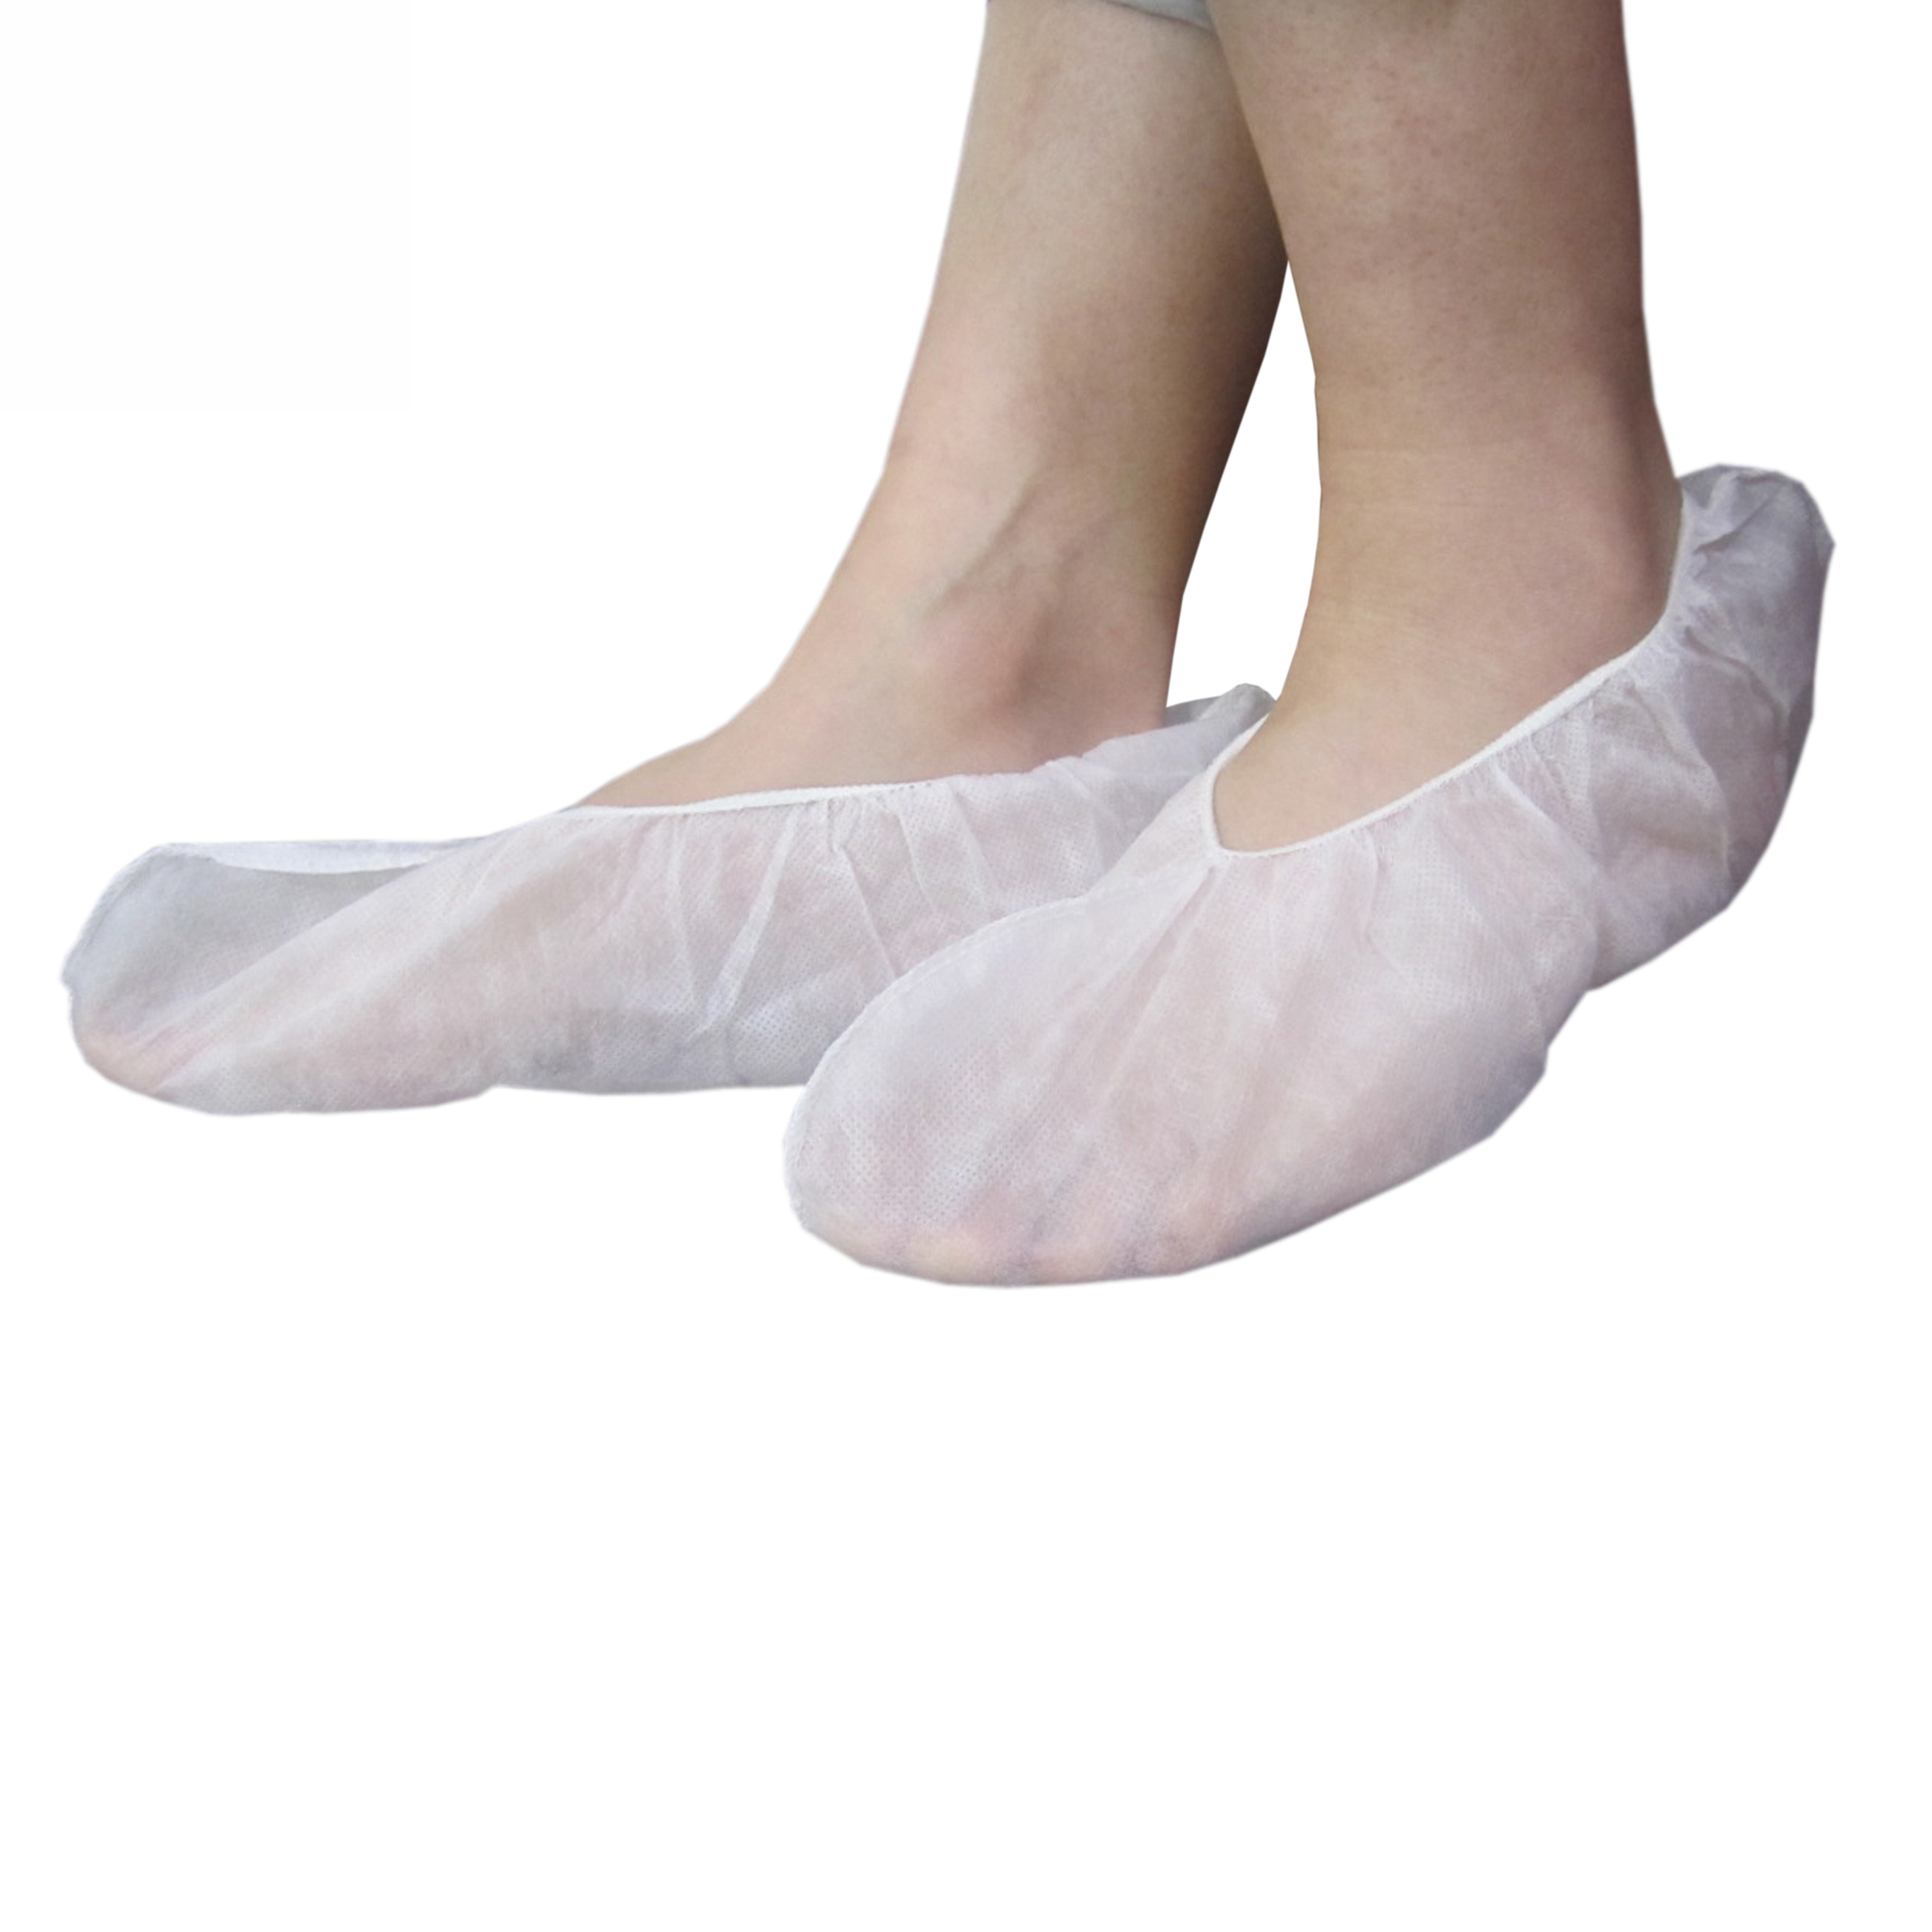 Disposable Non Woven Sock Cover Made by Hand